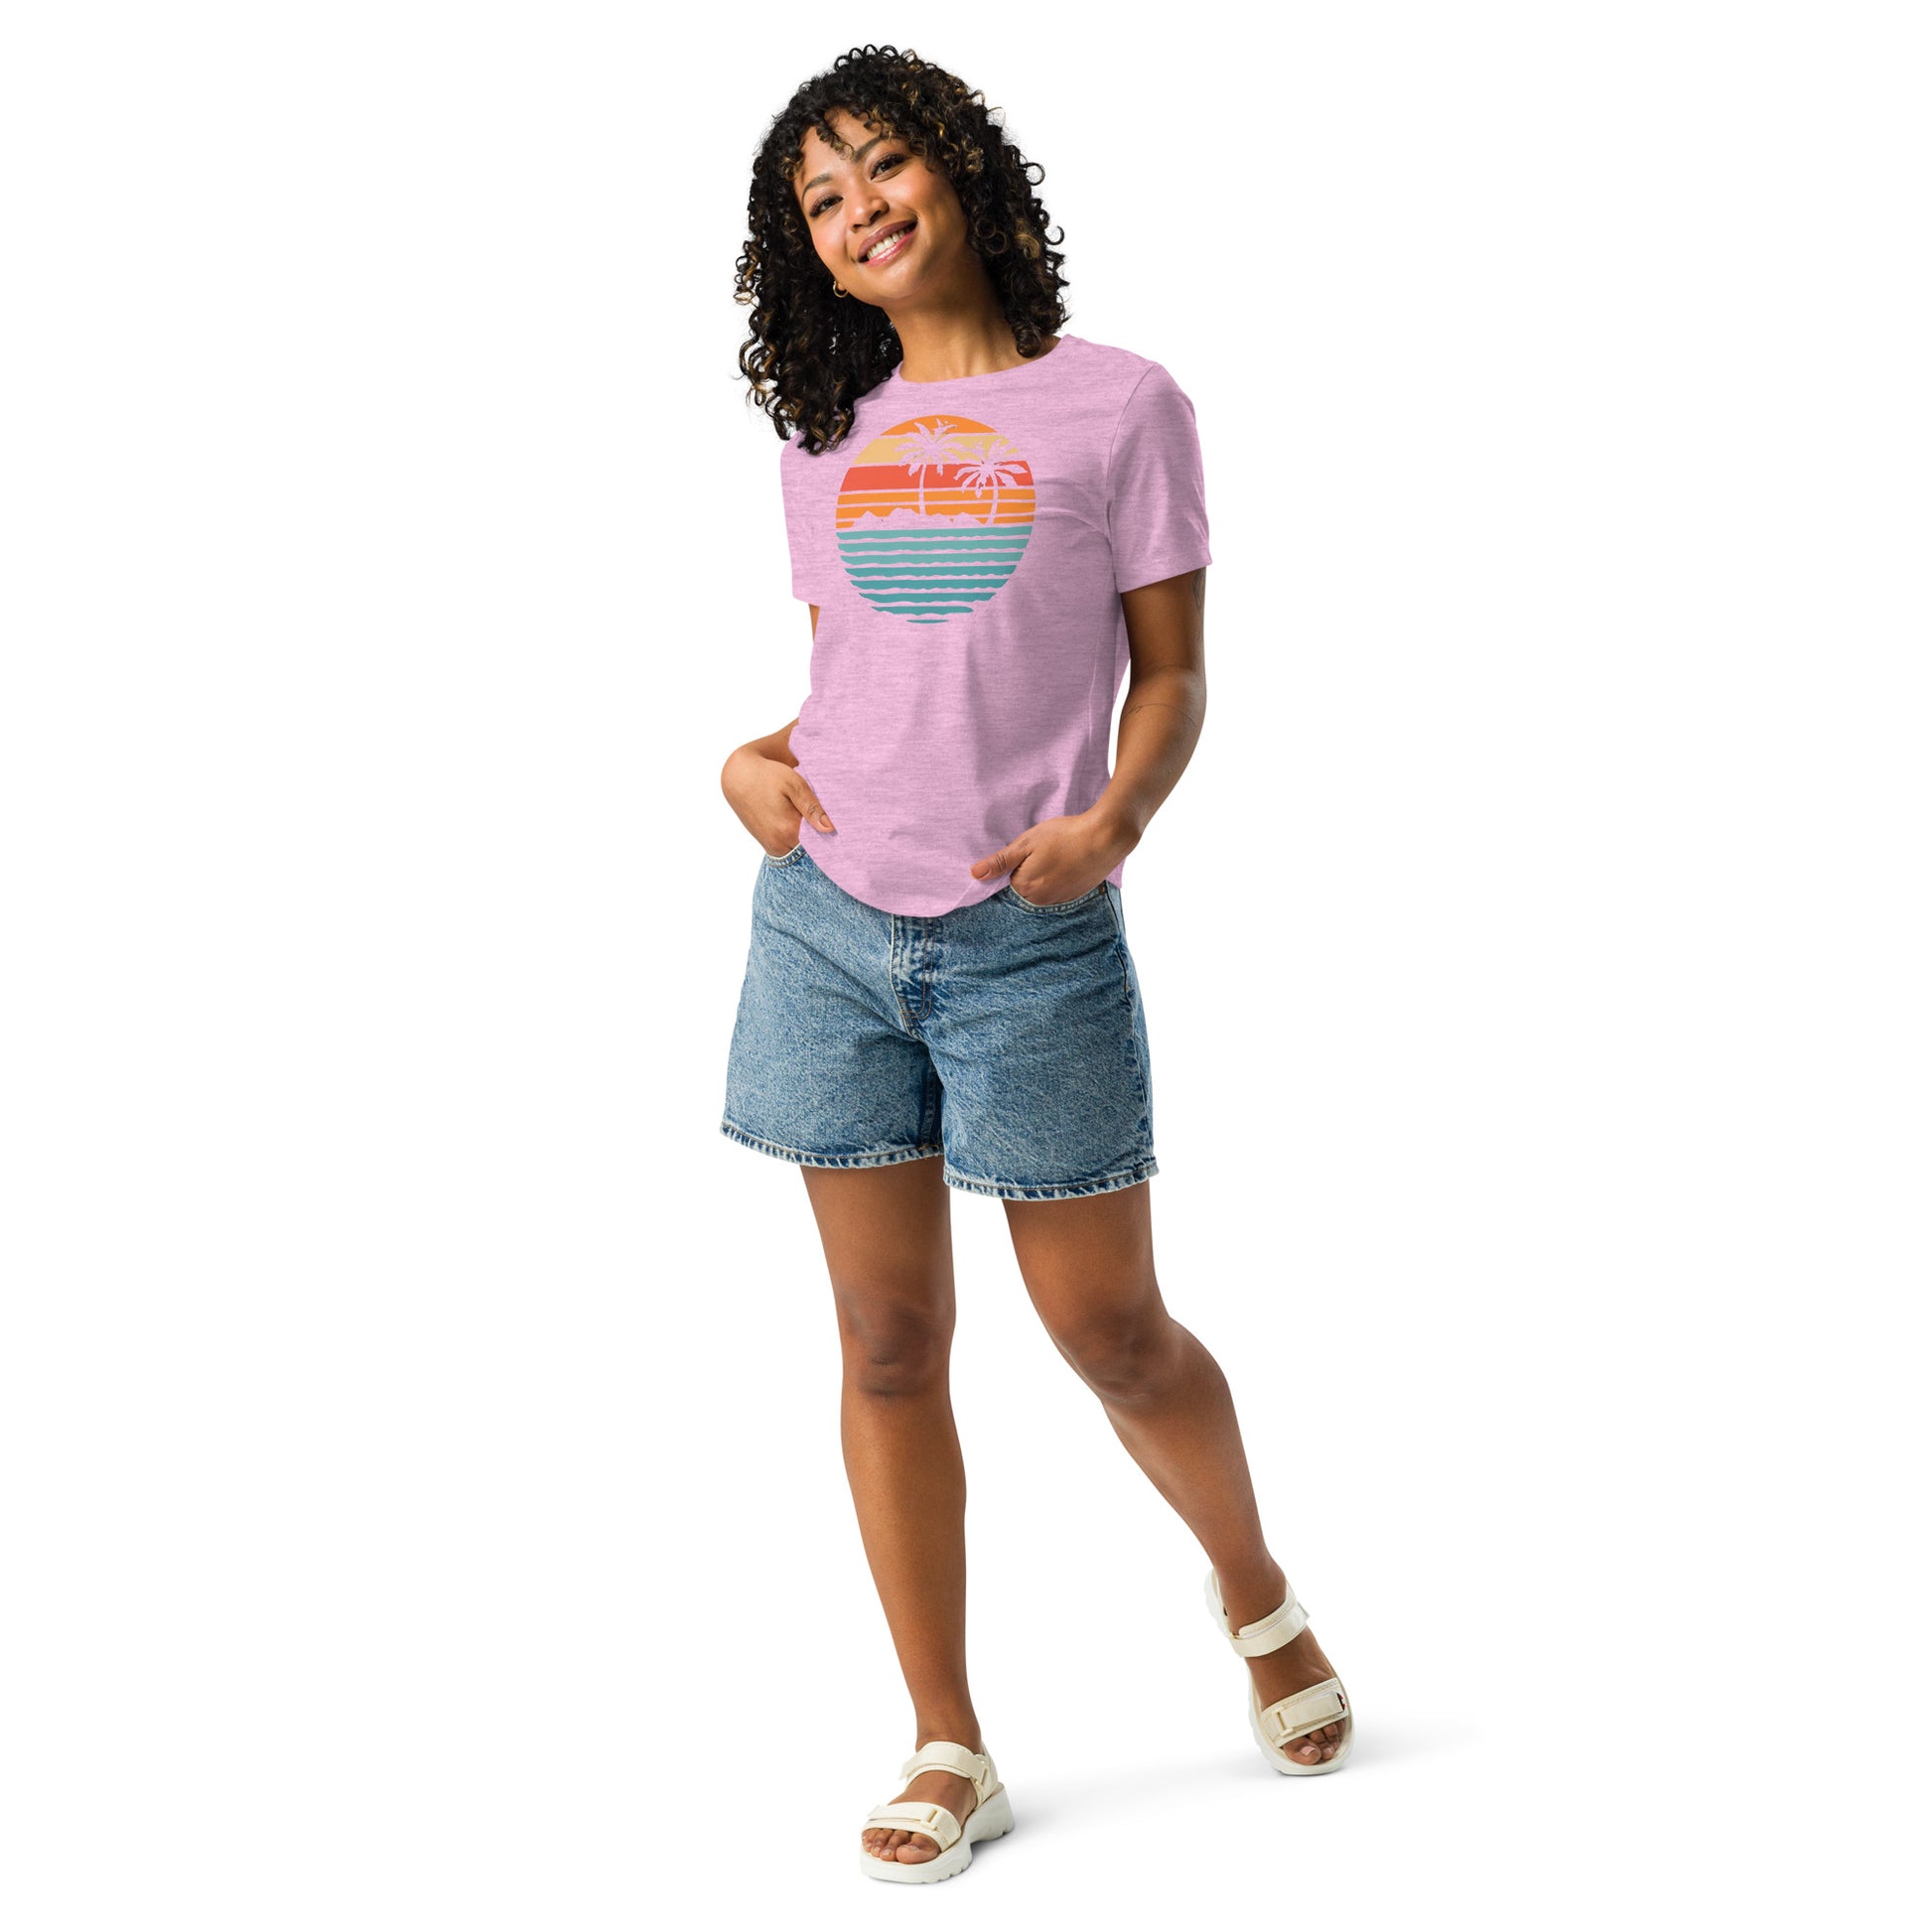 Women with lilac T-shirt and a retro Island